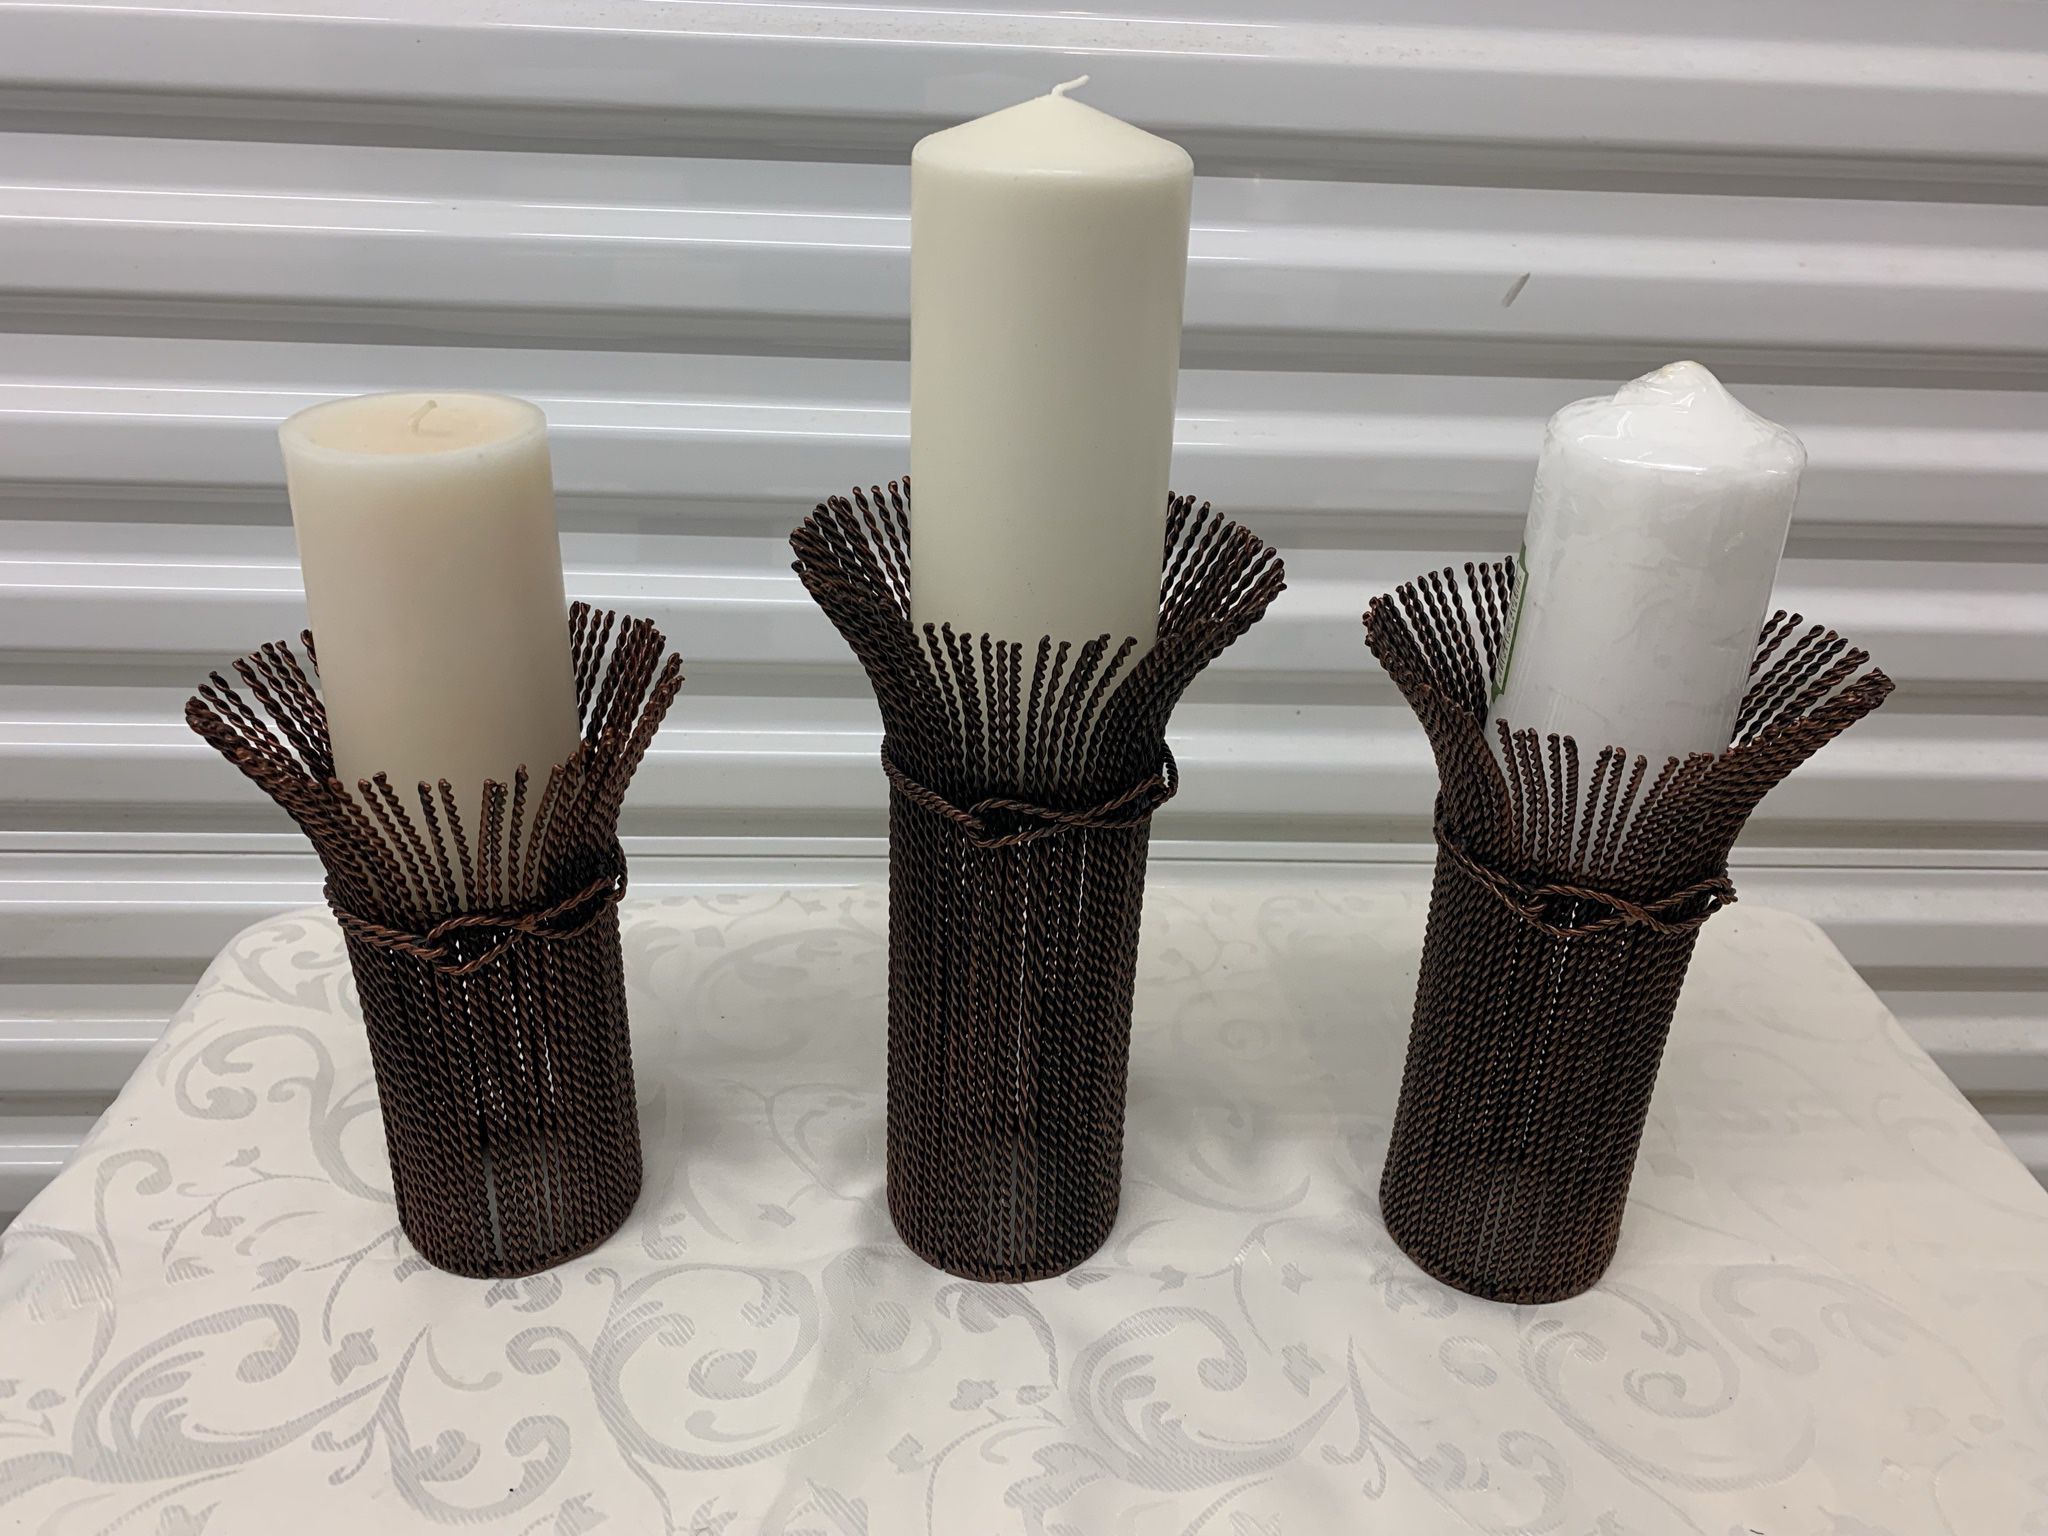 3 piece Beautiful Oil Rubbed Bronze Metal Candle Holder Set